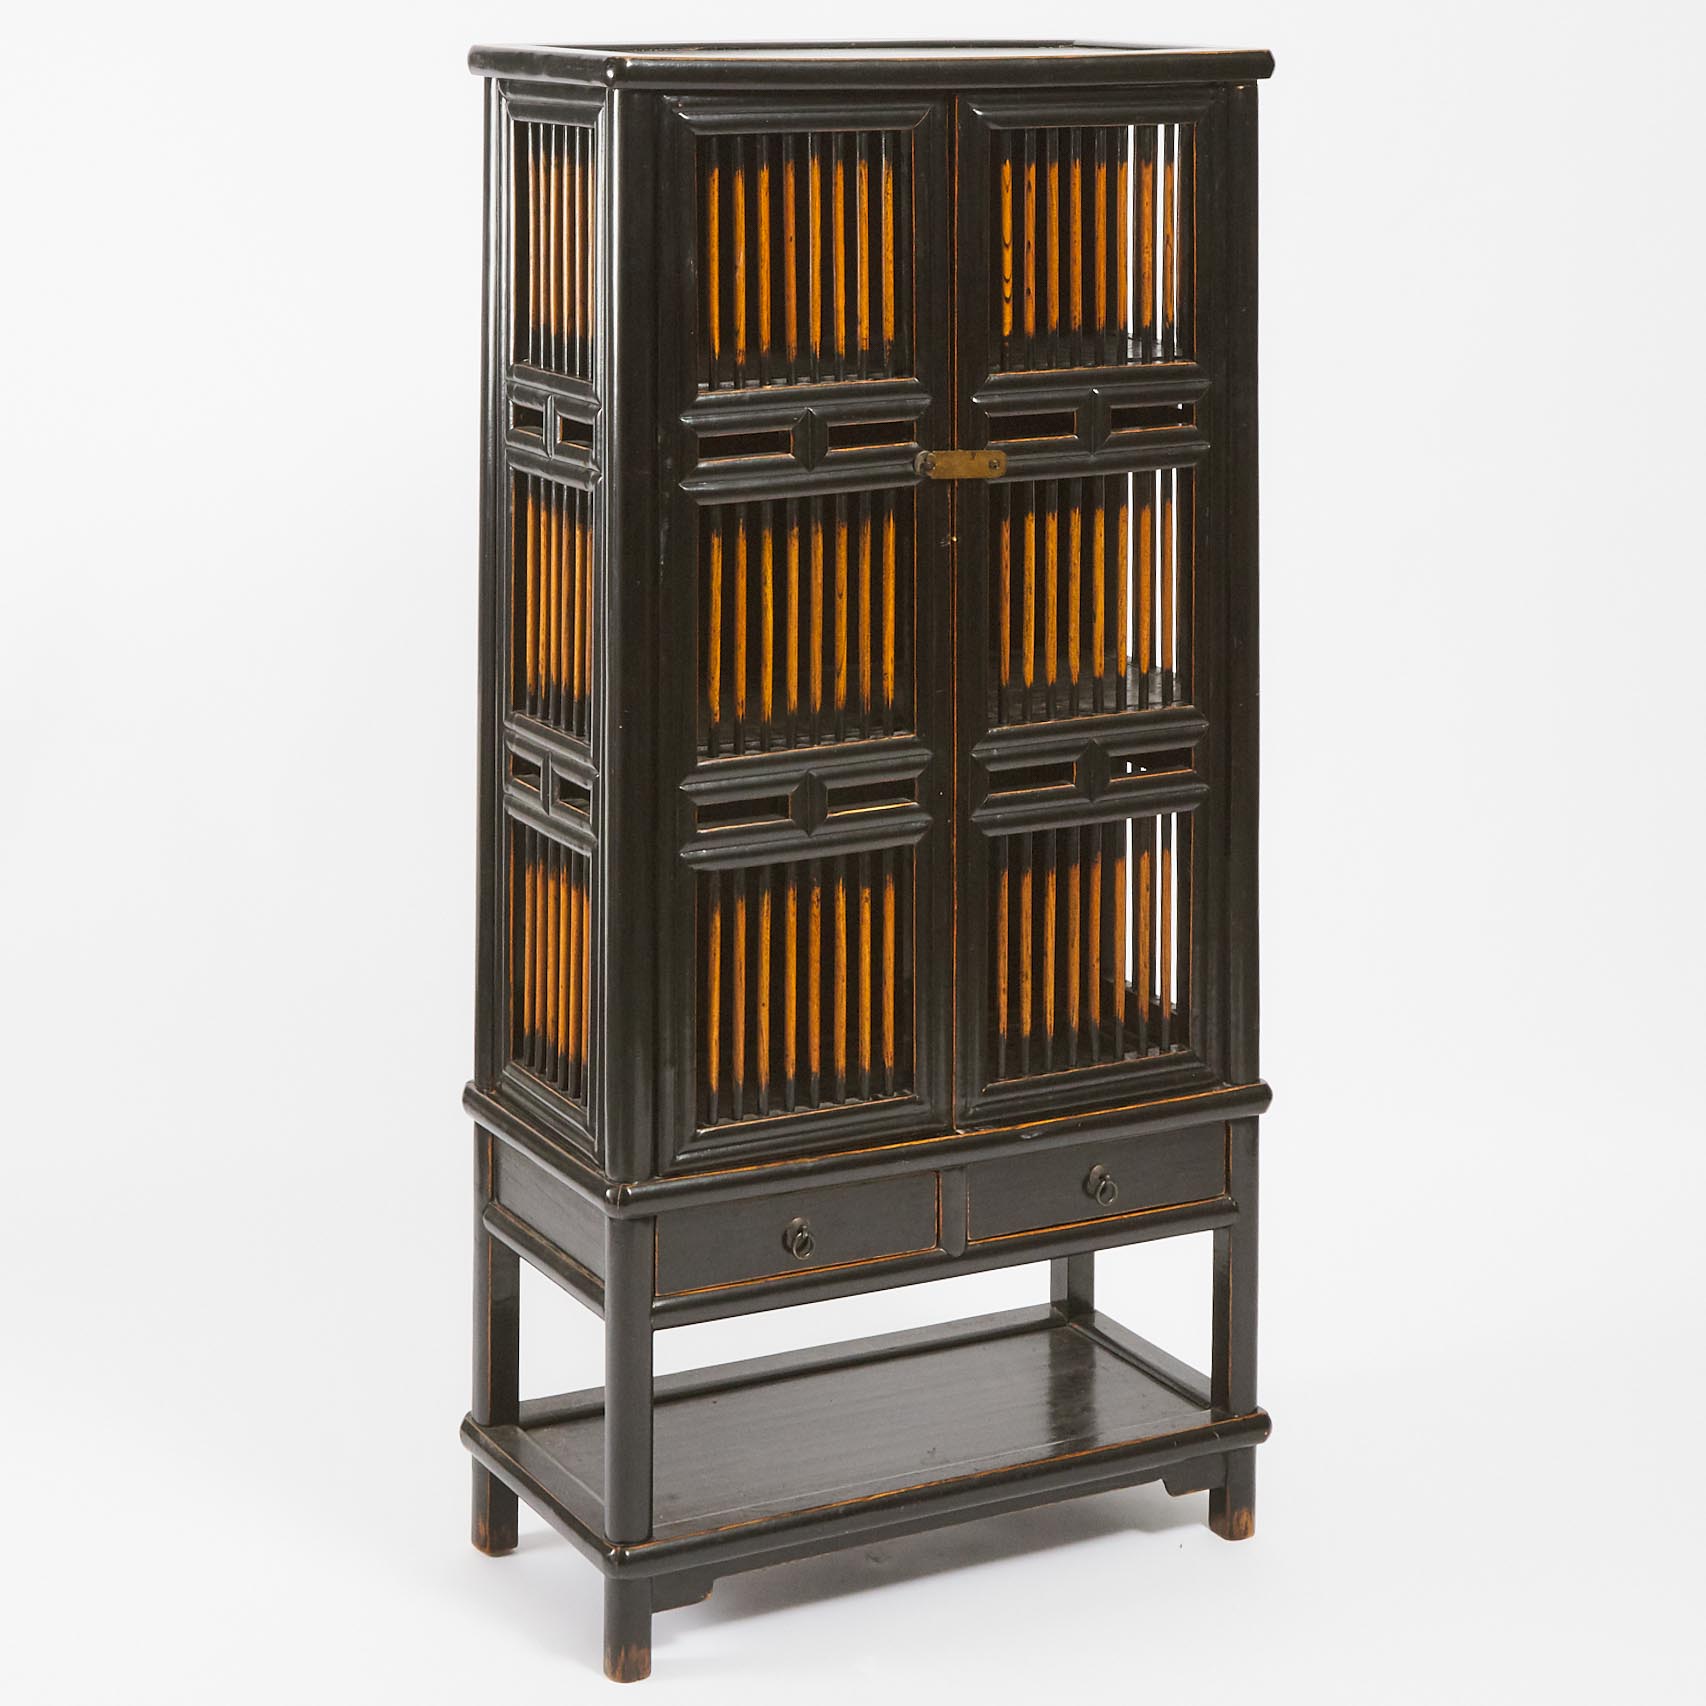 A Chinese Black Lacquered 'Spindle' Cabinet, Early to Mid 20th Century